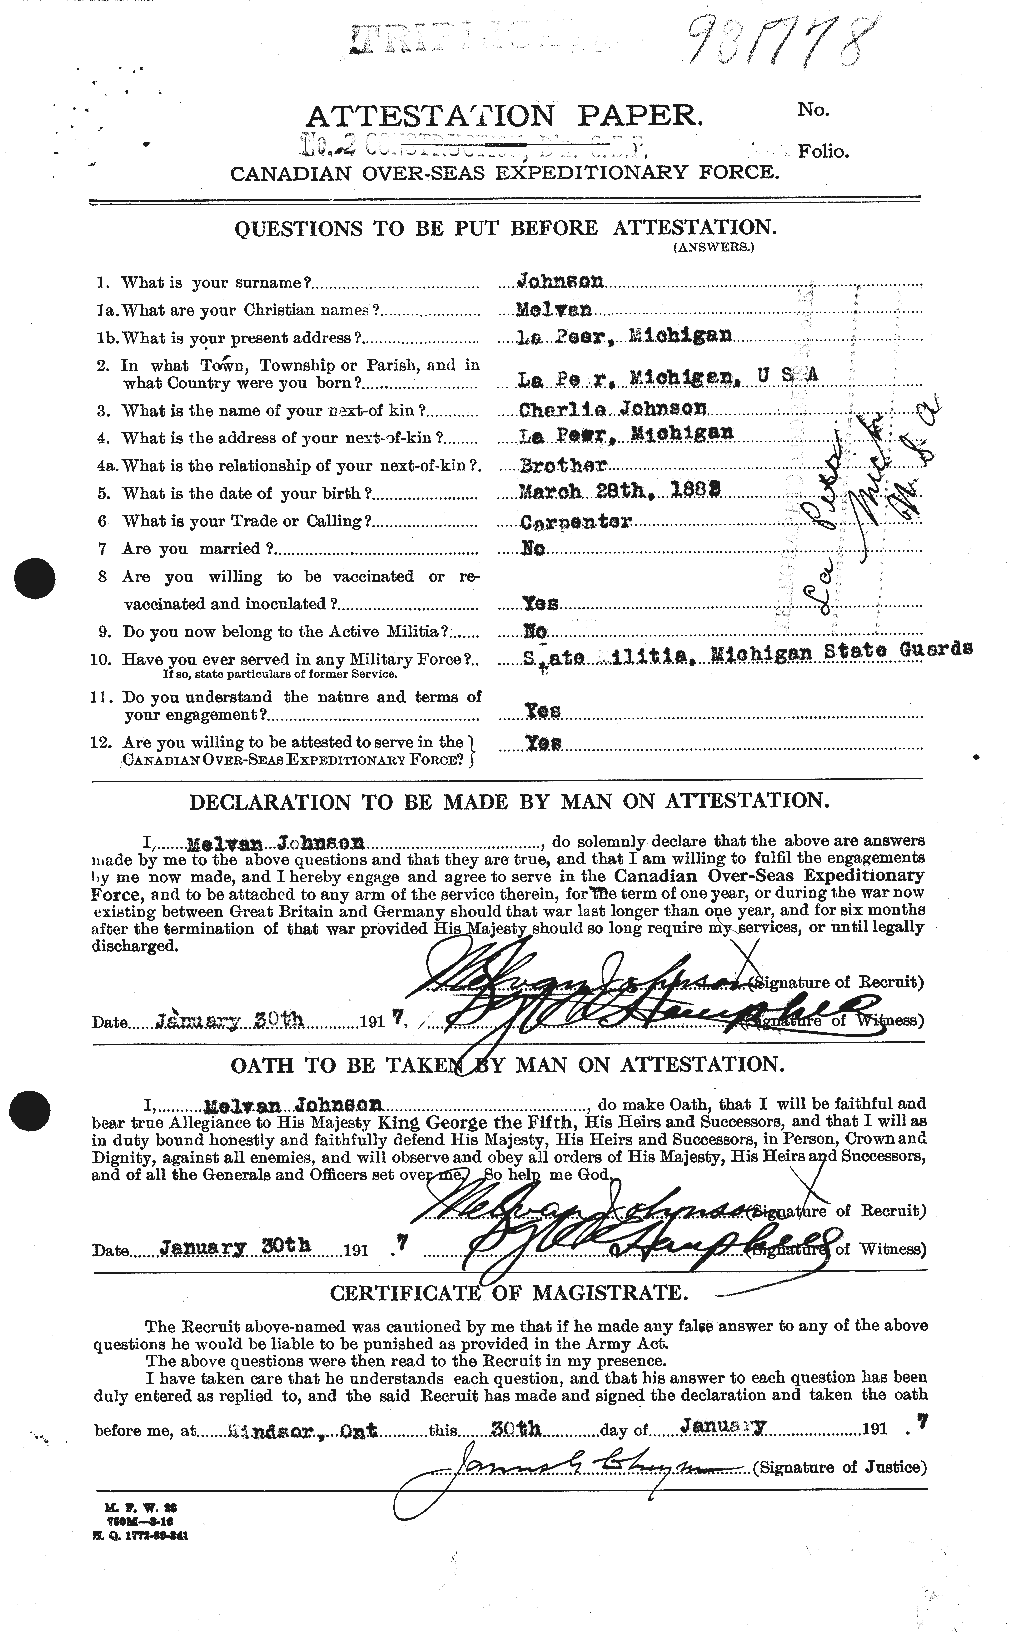 Personnel Records of the First World War - CEF 422137a